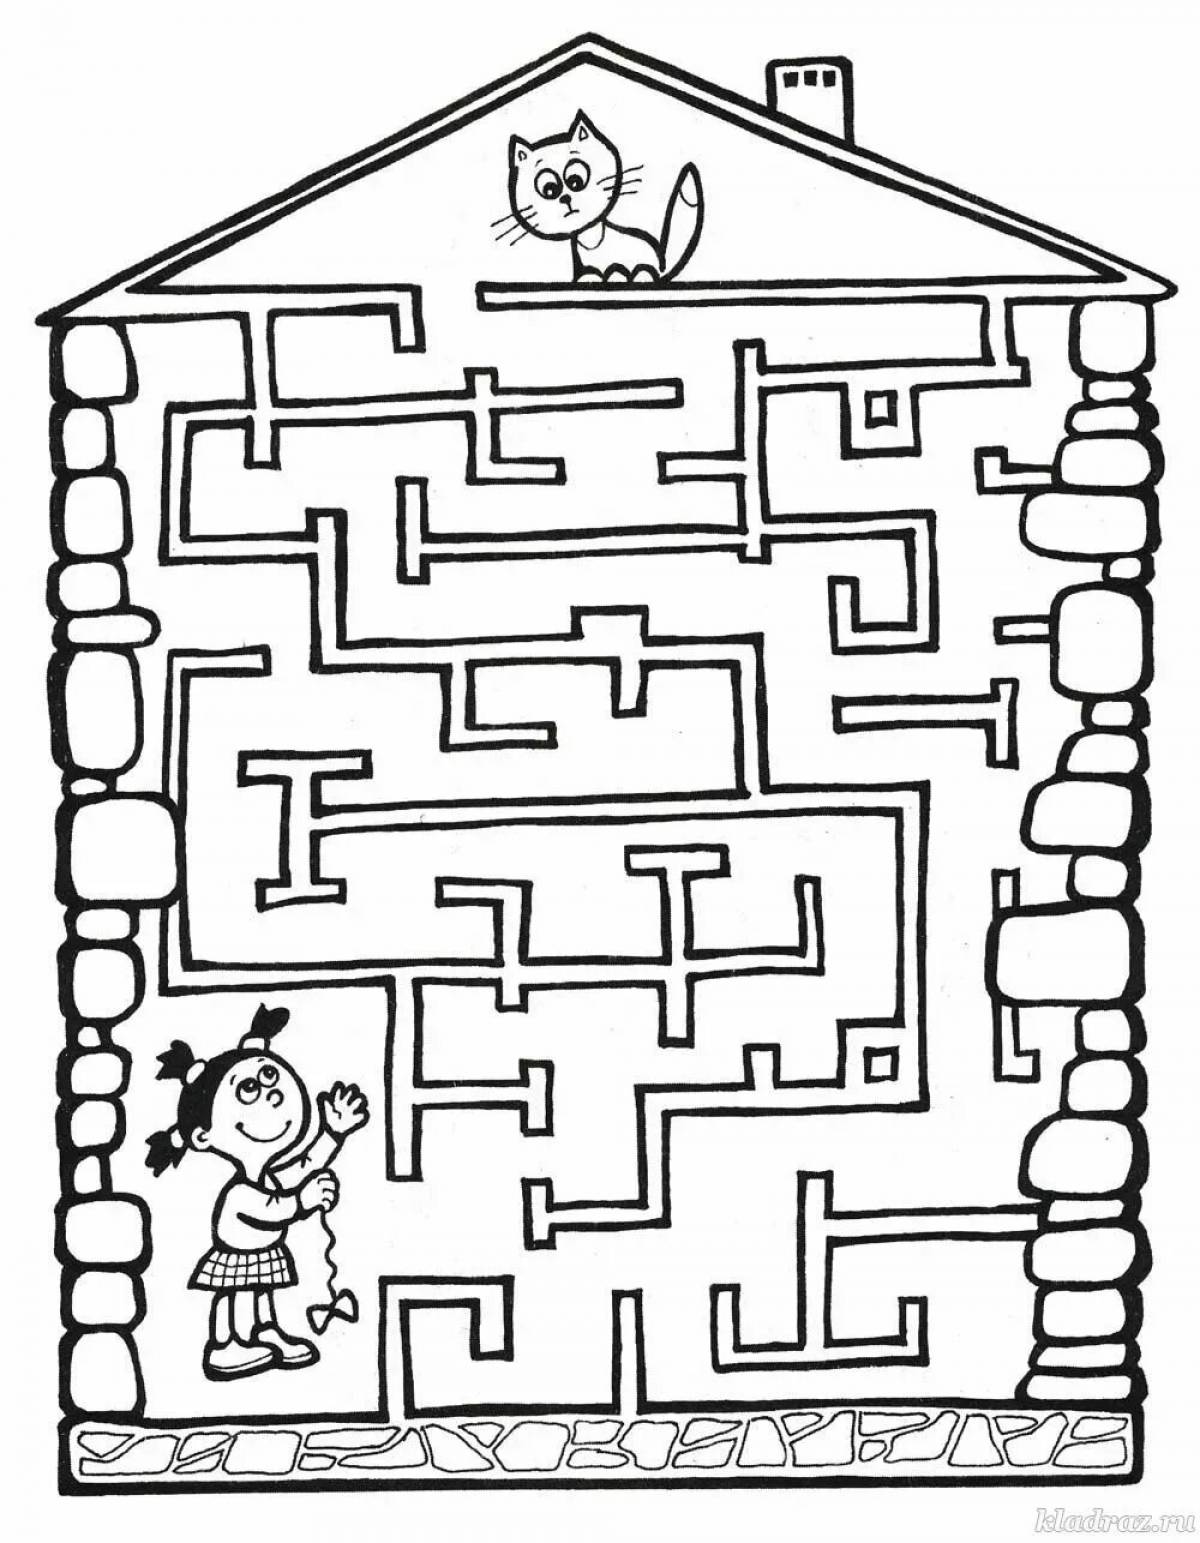 Outstanding coloring maze for 7 year olds